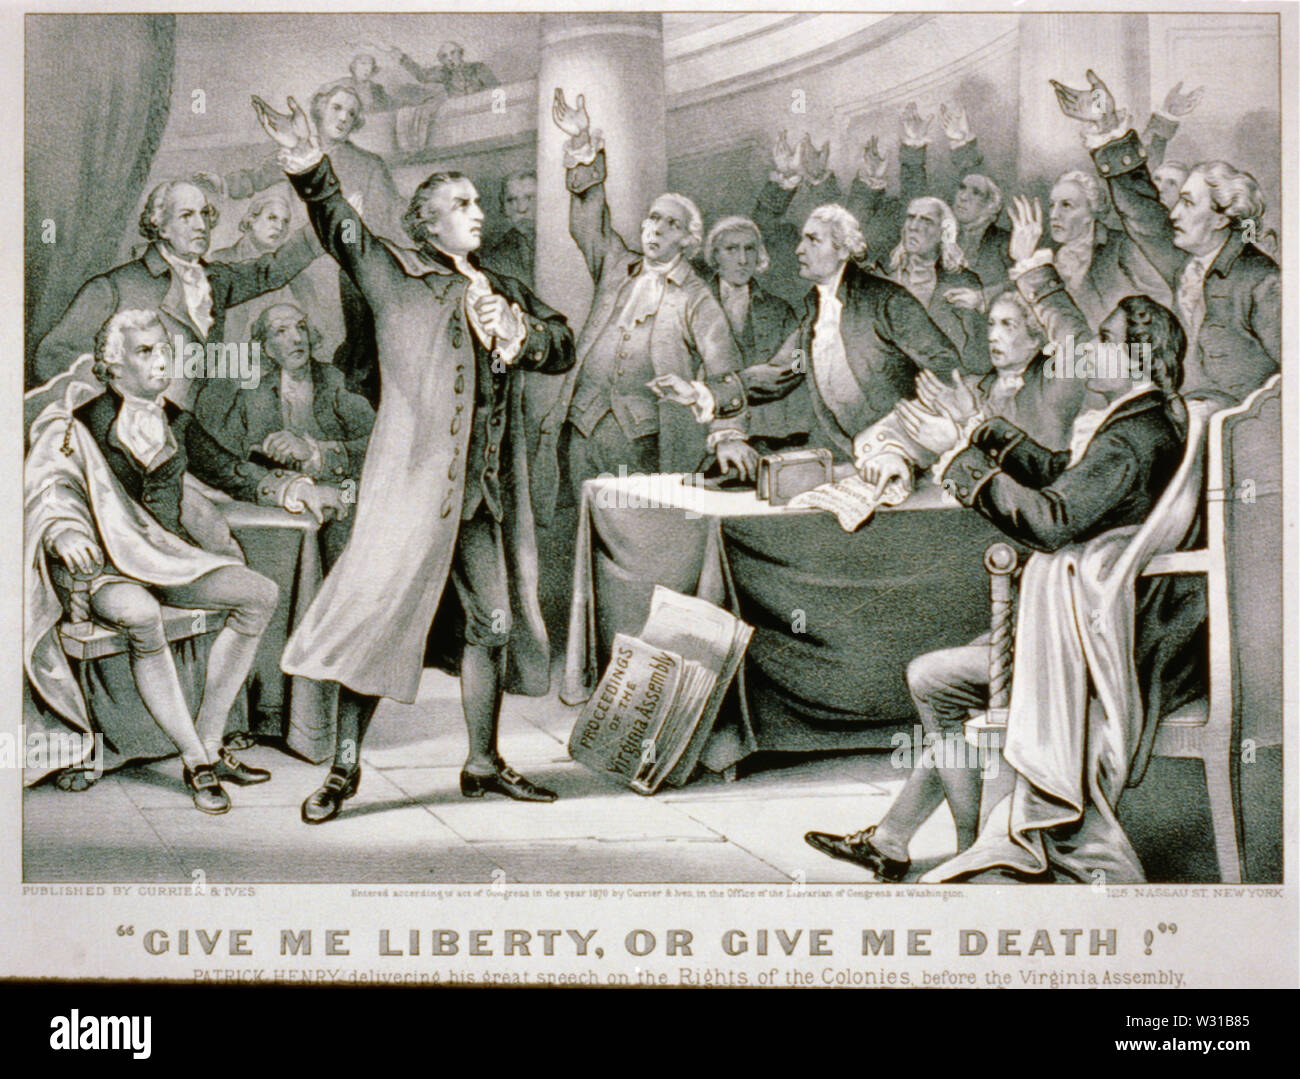 patrick henry give me liberty or death speech